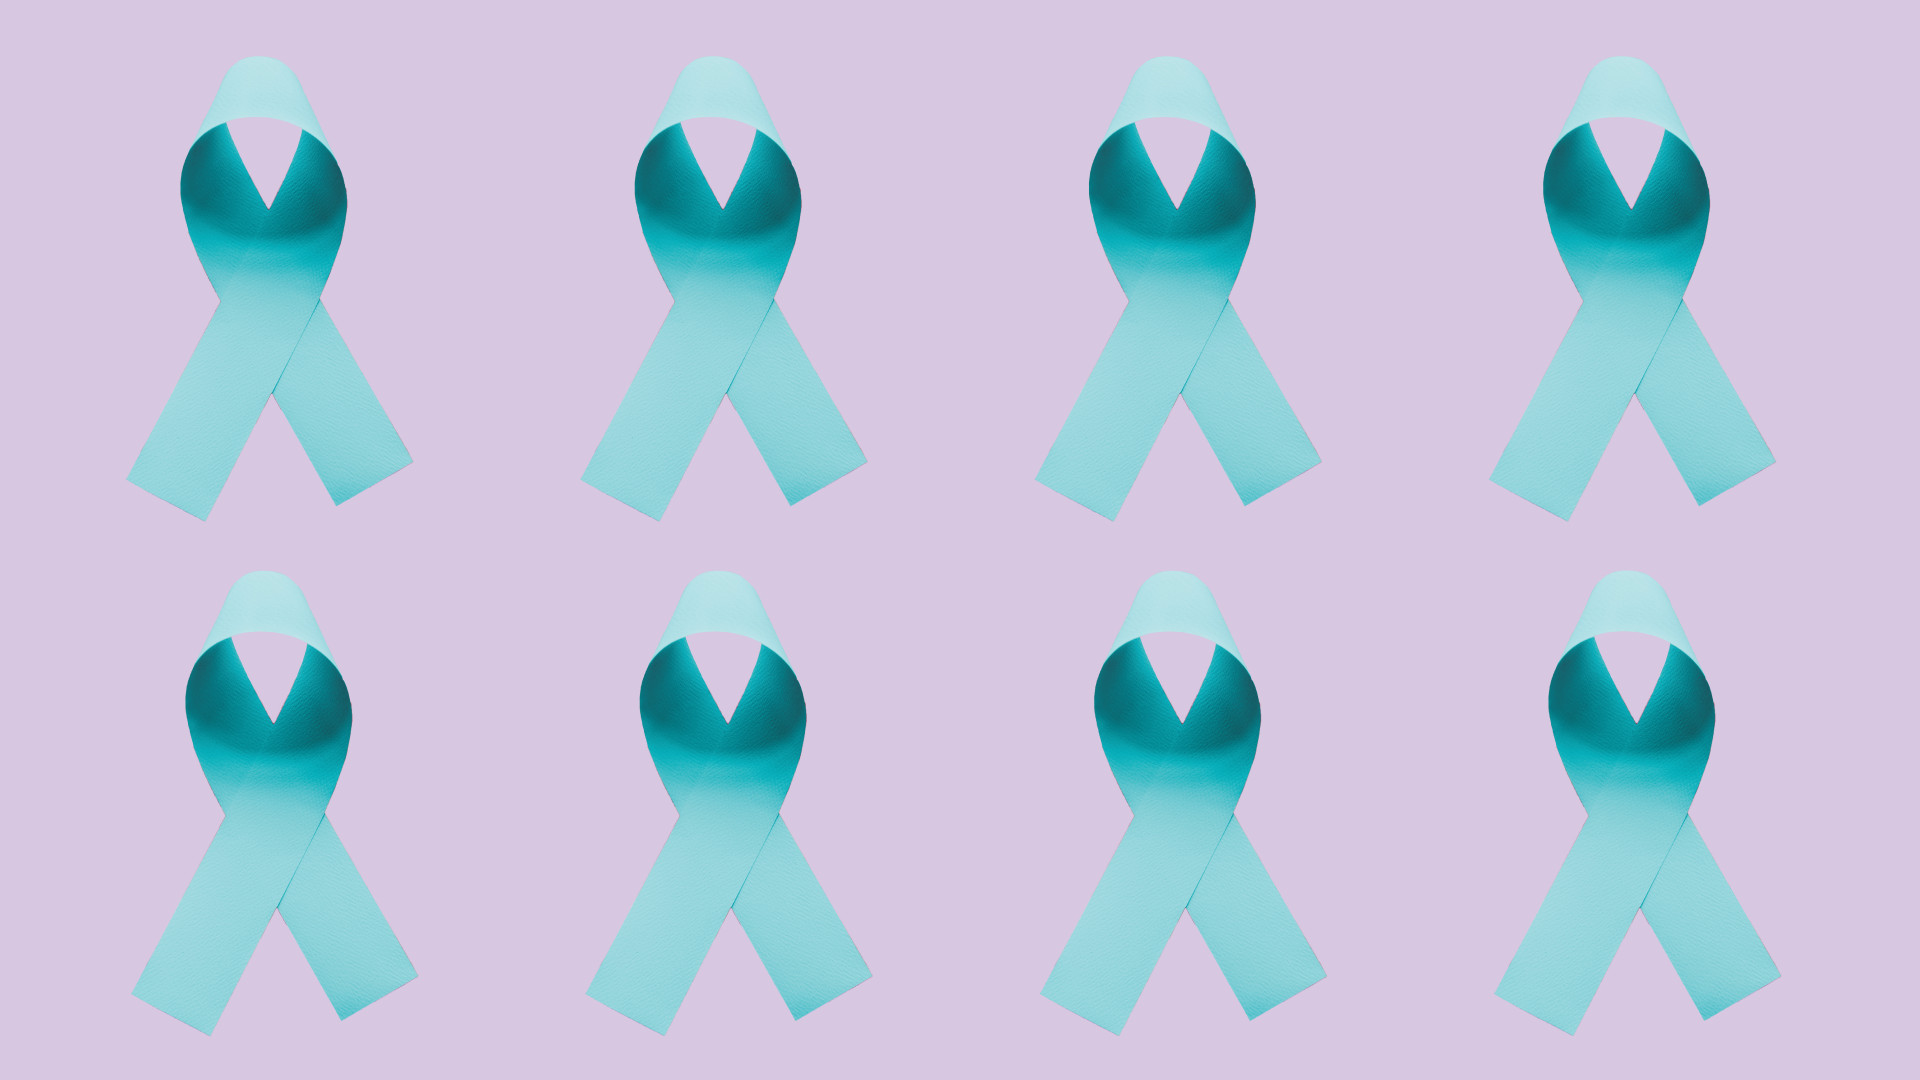 A pattern of teal ribbons against a purple background